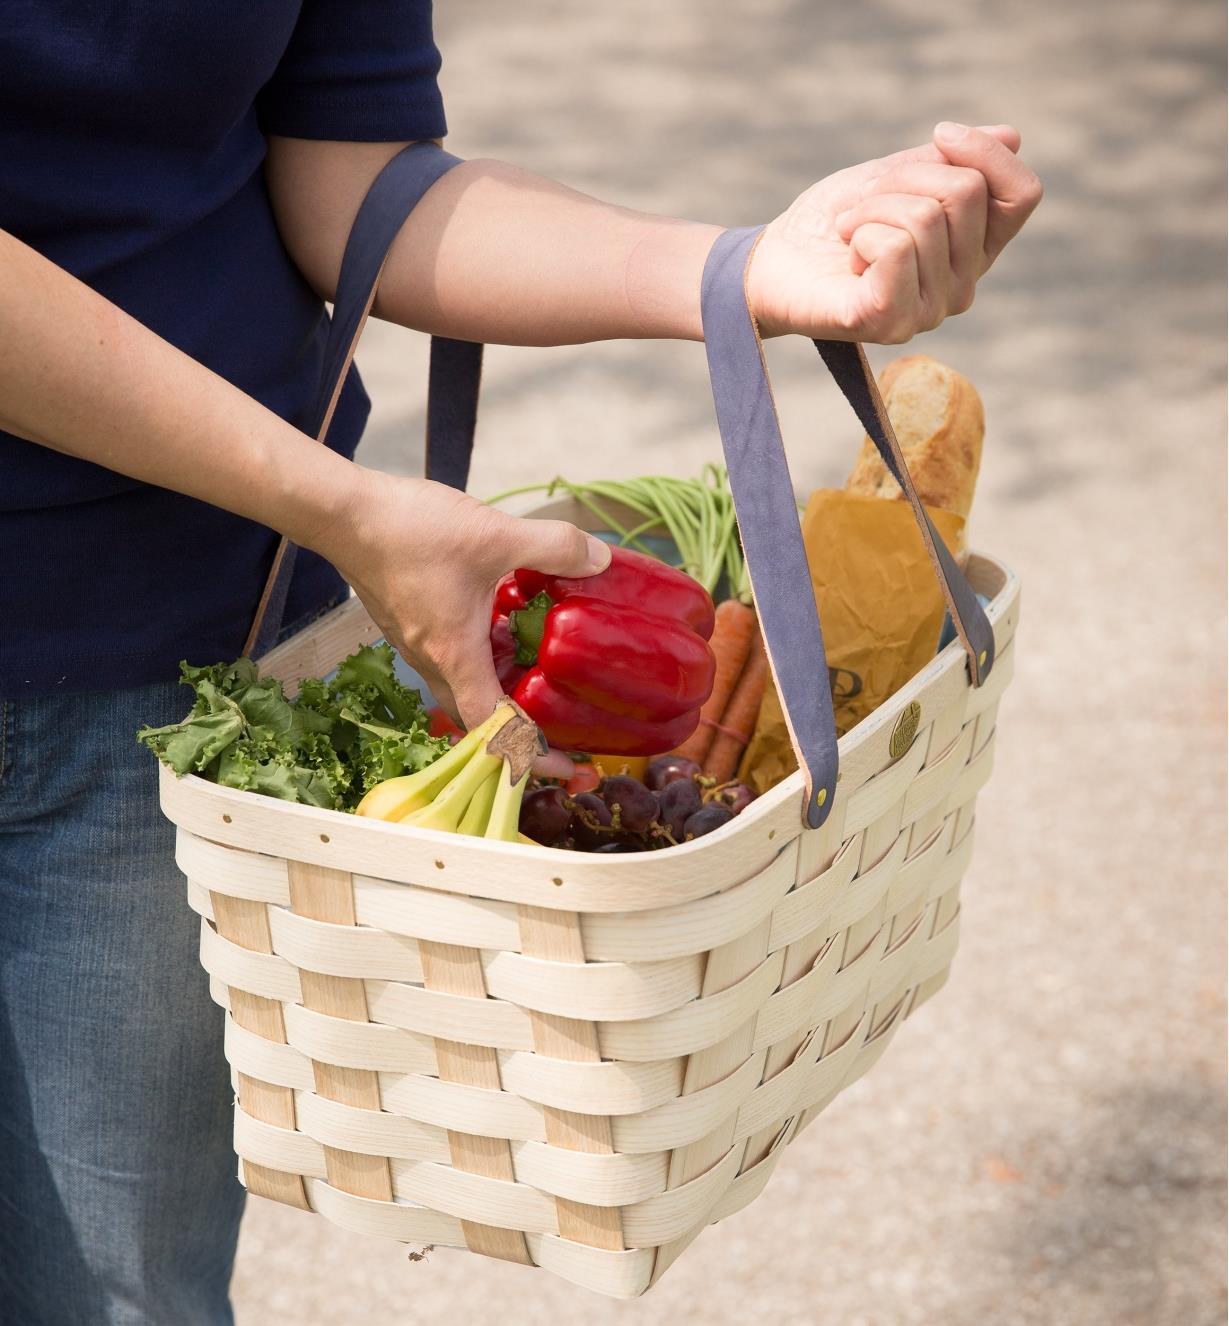 A woman holds a Handwoven Basket Tote filled with produce and a baguette